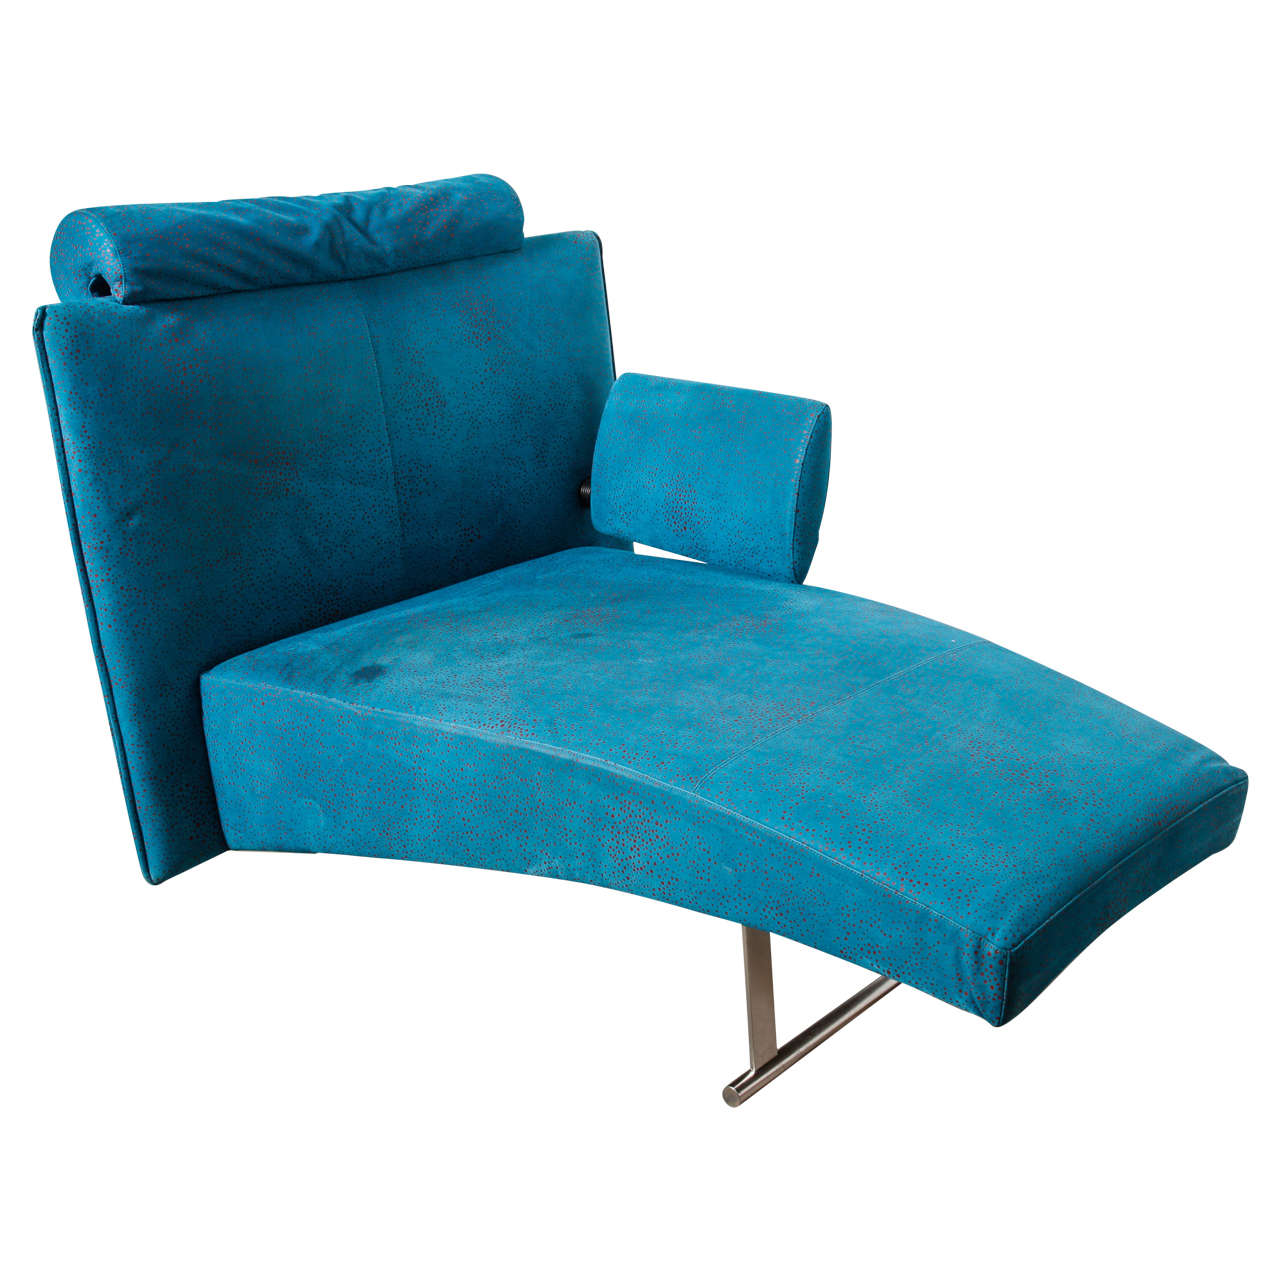 Postmodern design in Memphis style chaise lounge, couche, settee, daybed and loveseat! Steel chrome legs, upholstery blue velvet with aubergine spots and 1980s feathers print motif cushions. Good condition.